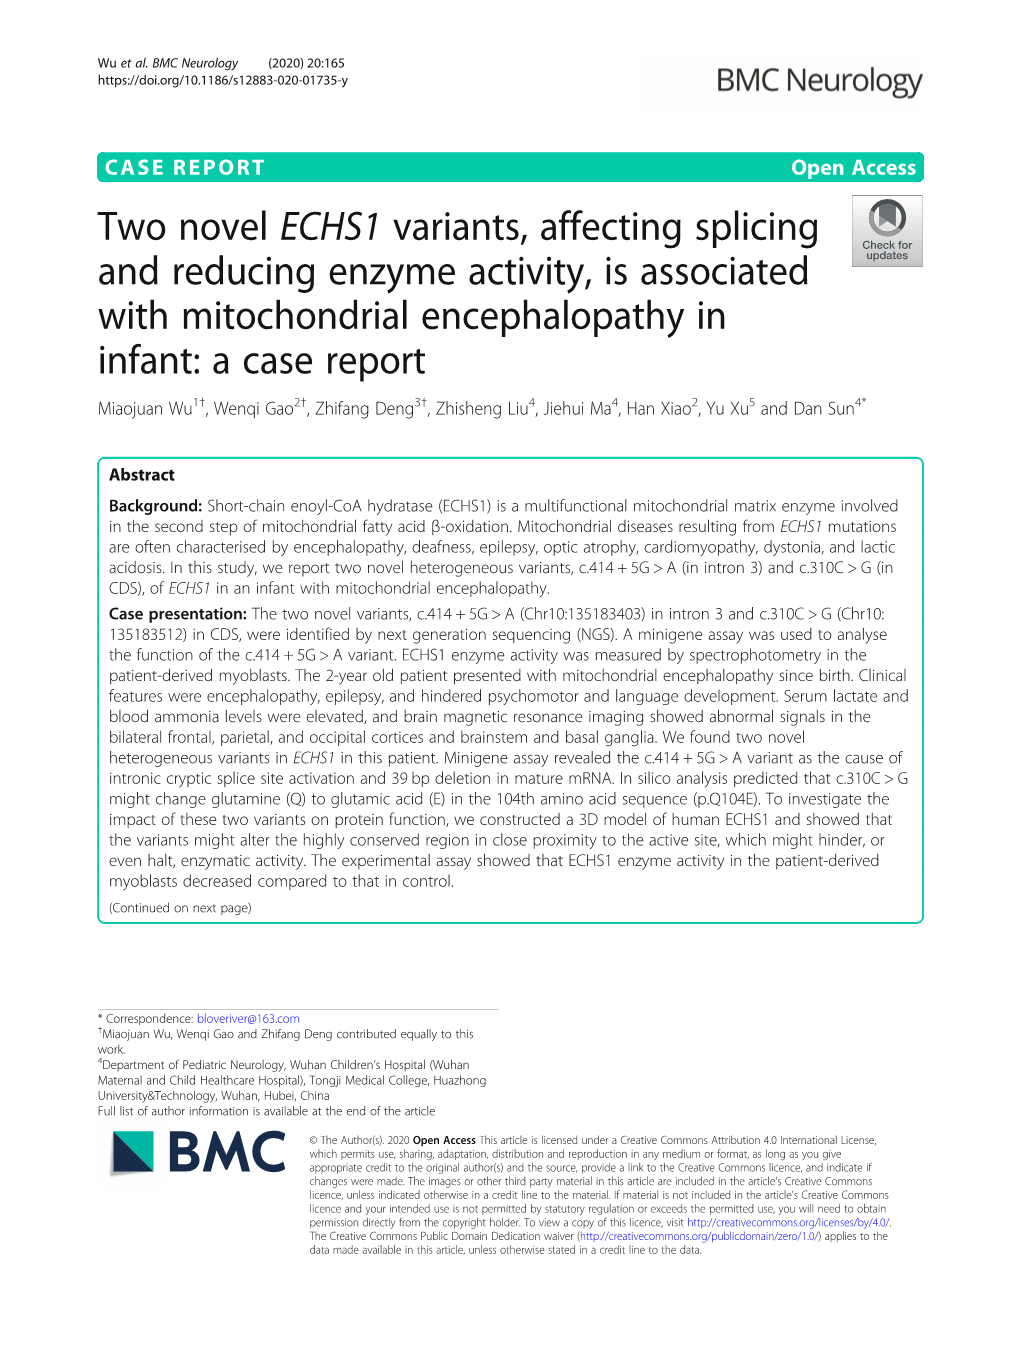 Two Novel ECHS1 Variants, Affecting Splicing and Reducing Enzyme